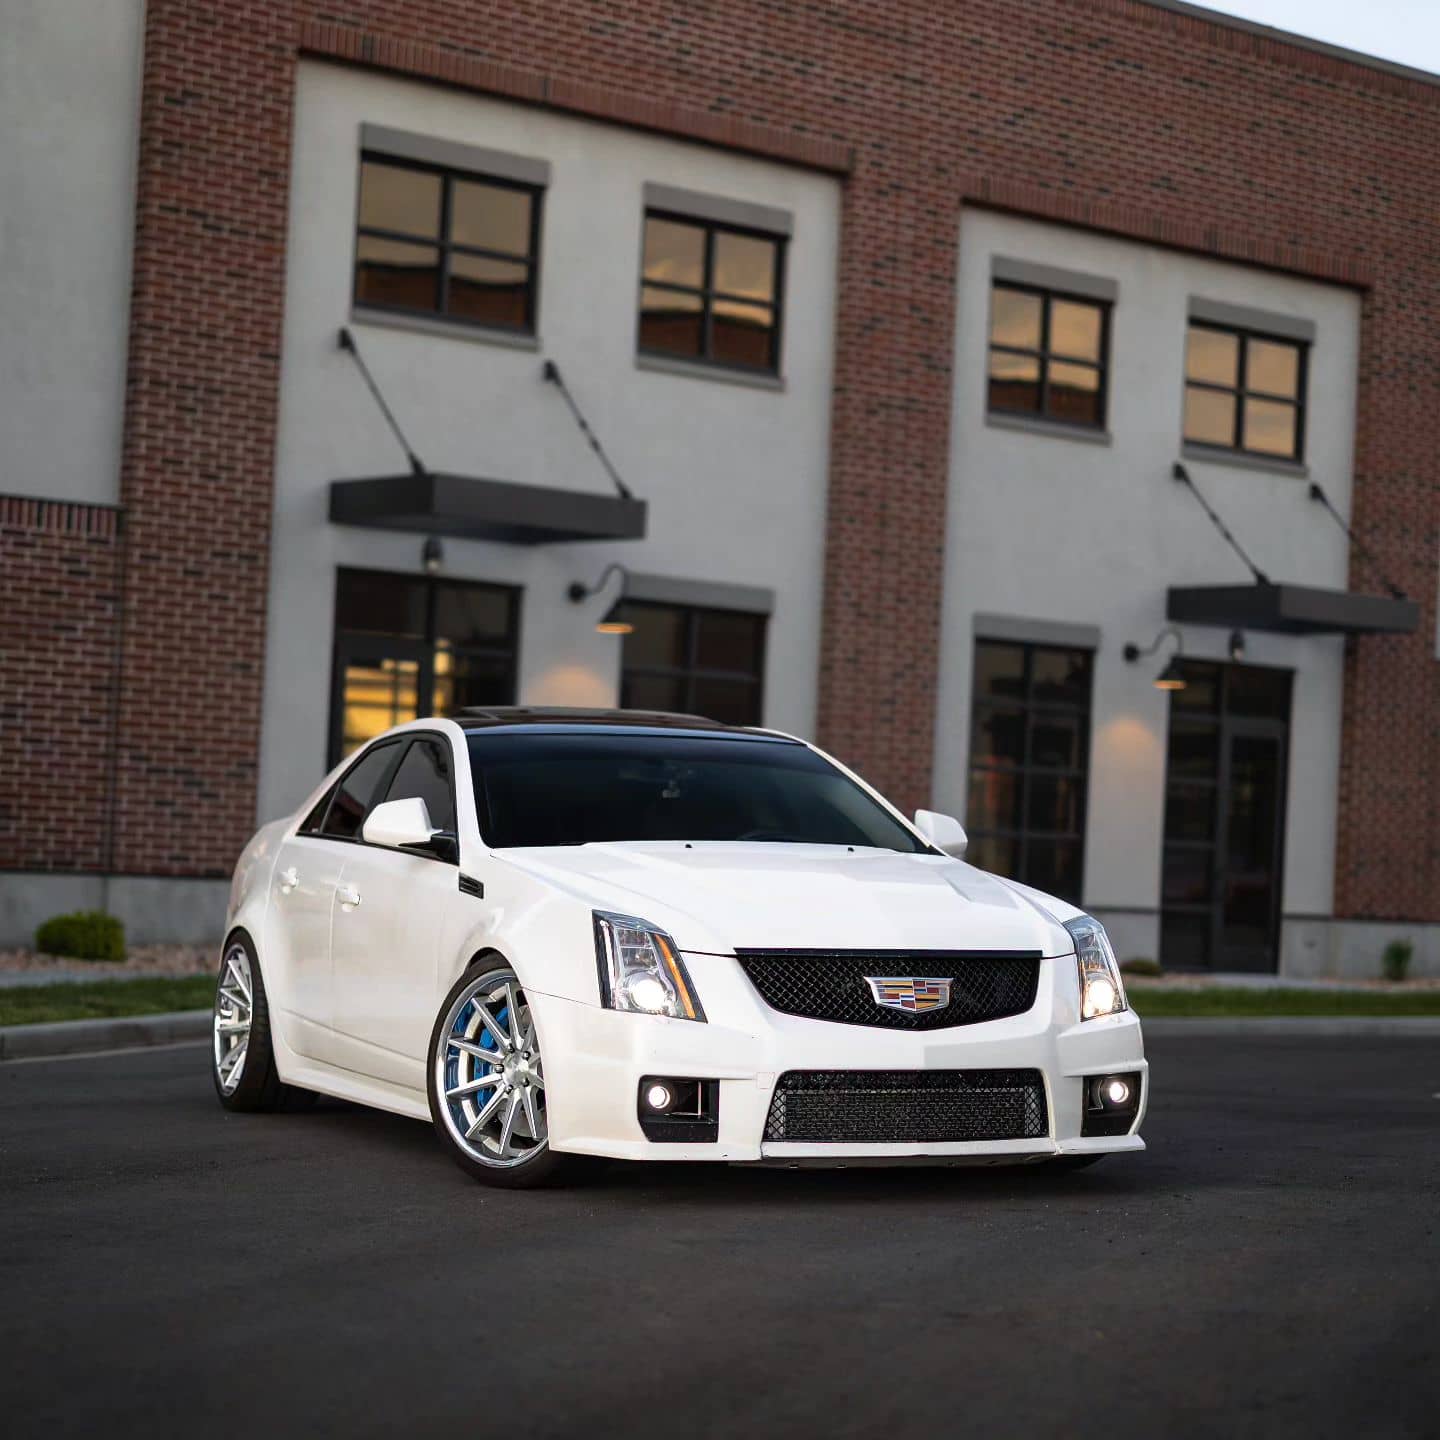 Modified 2nd Gen 2009 Cadillac CTS-V - The Elegant Sleeper with 603WHP